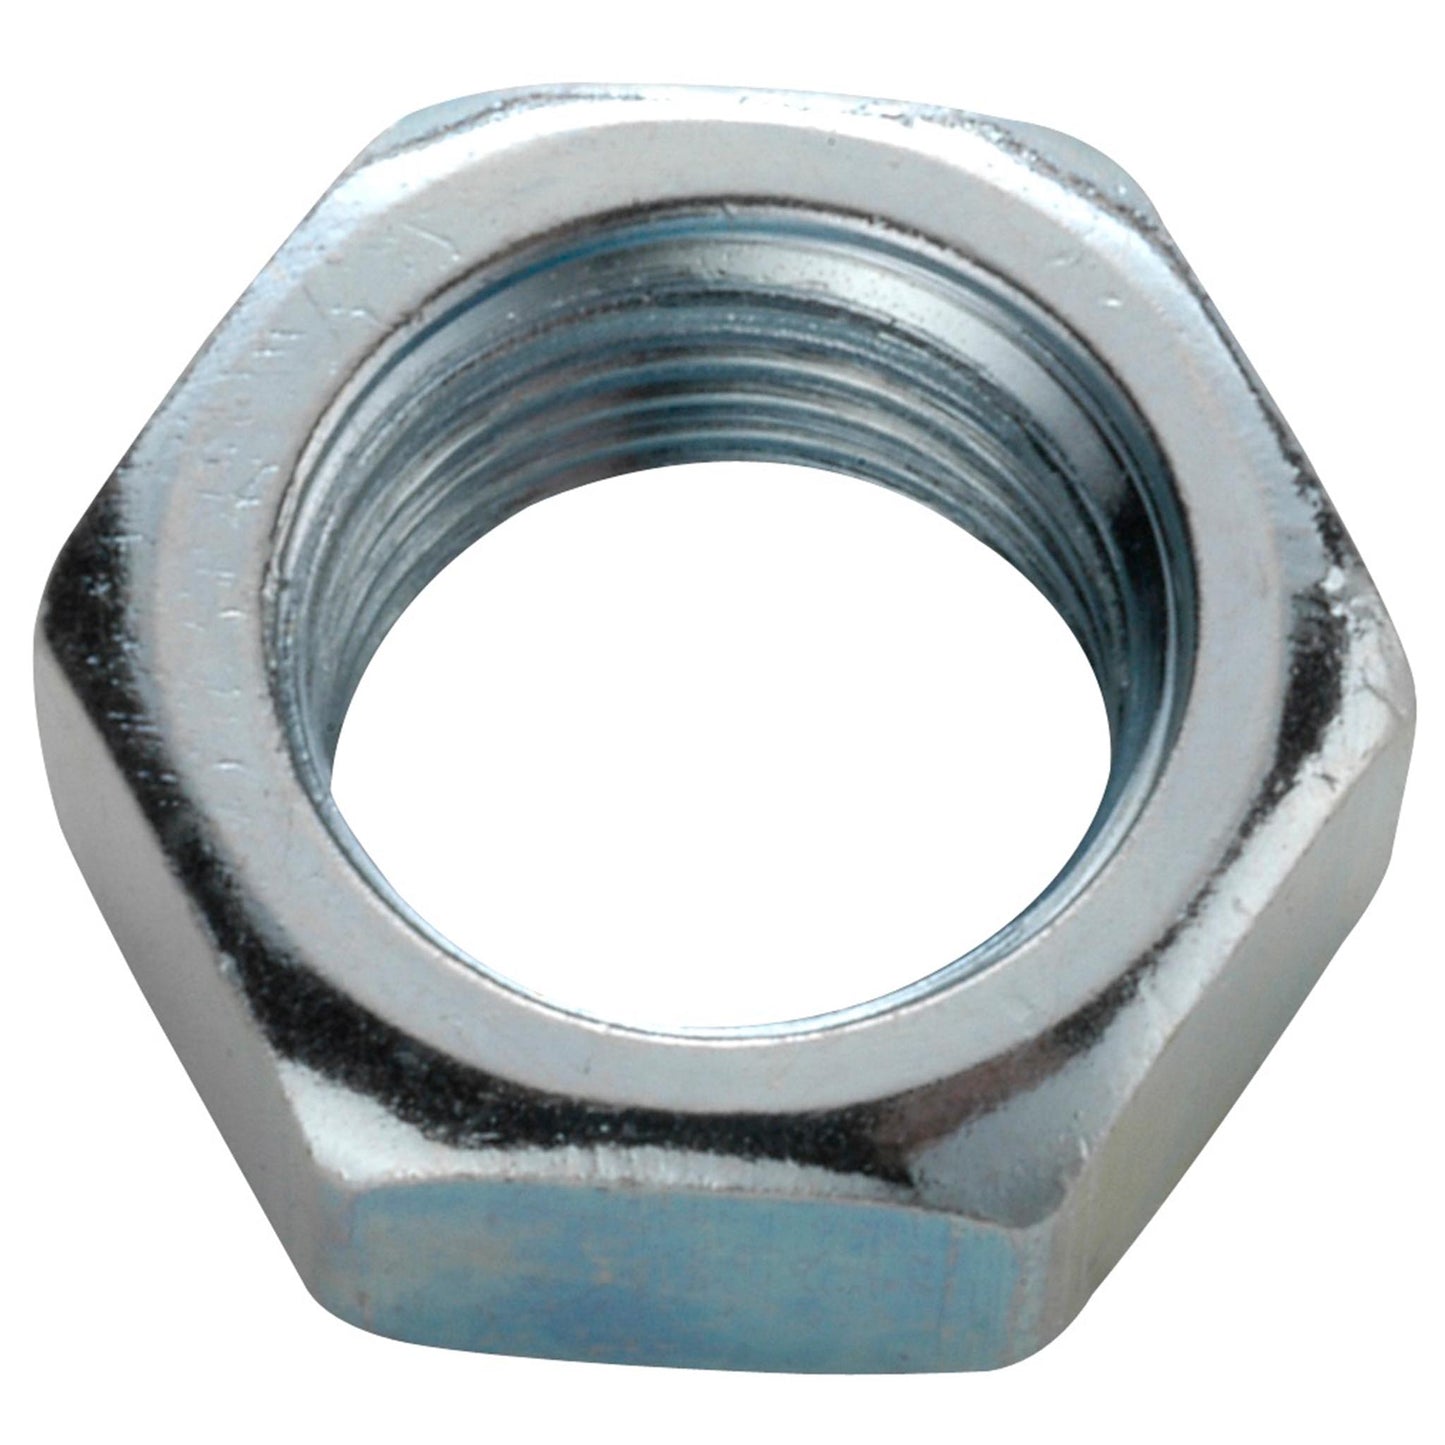 Hexagonal nuts for circuits M 10 x 1, galvanized steel